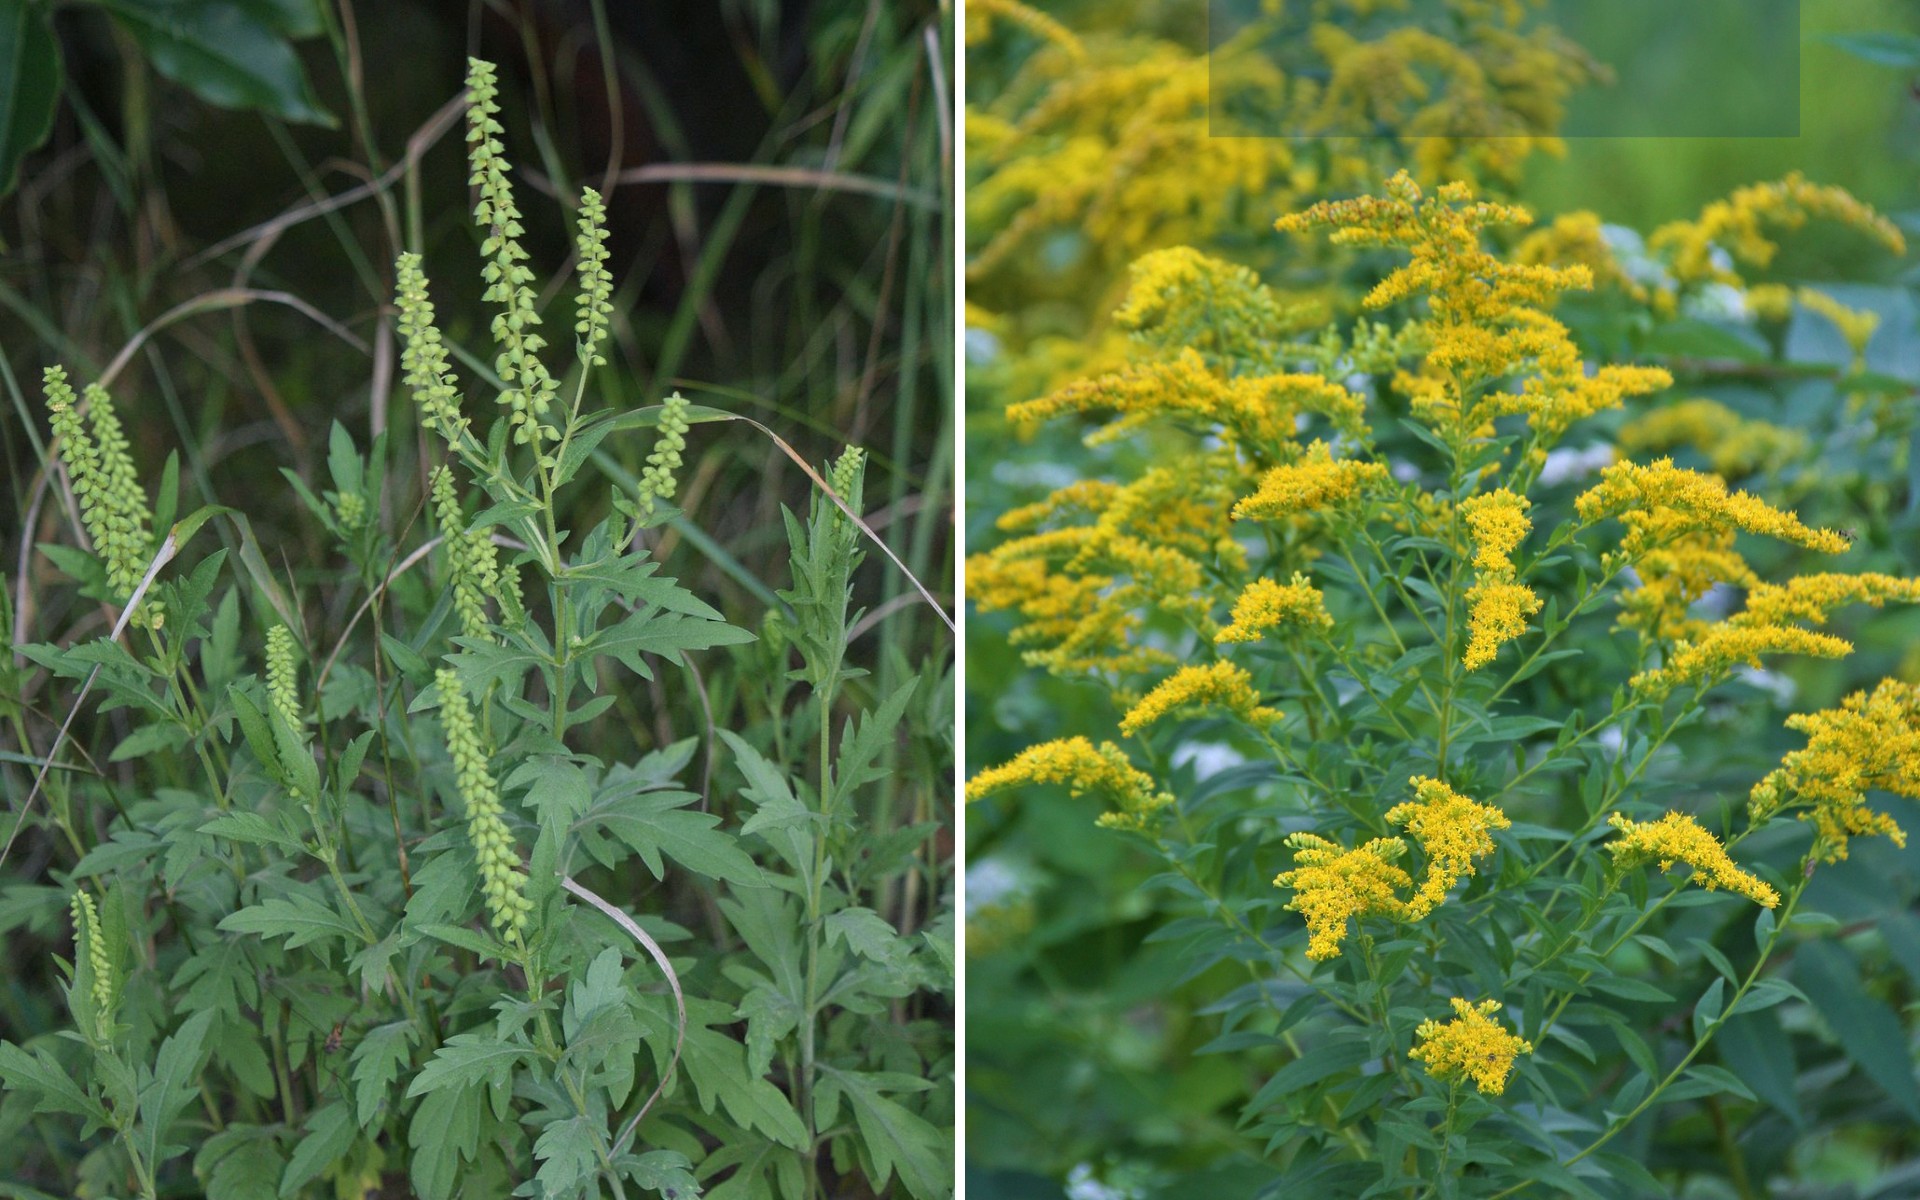 Less colorful ragweed flowers on the left, compared to showy, golden yellow goldenrod flowers on the right.